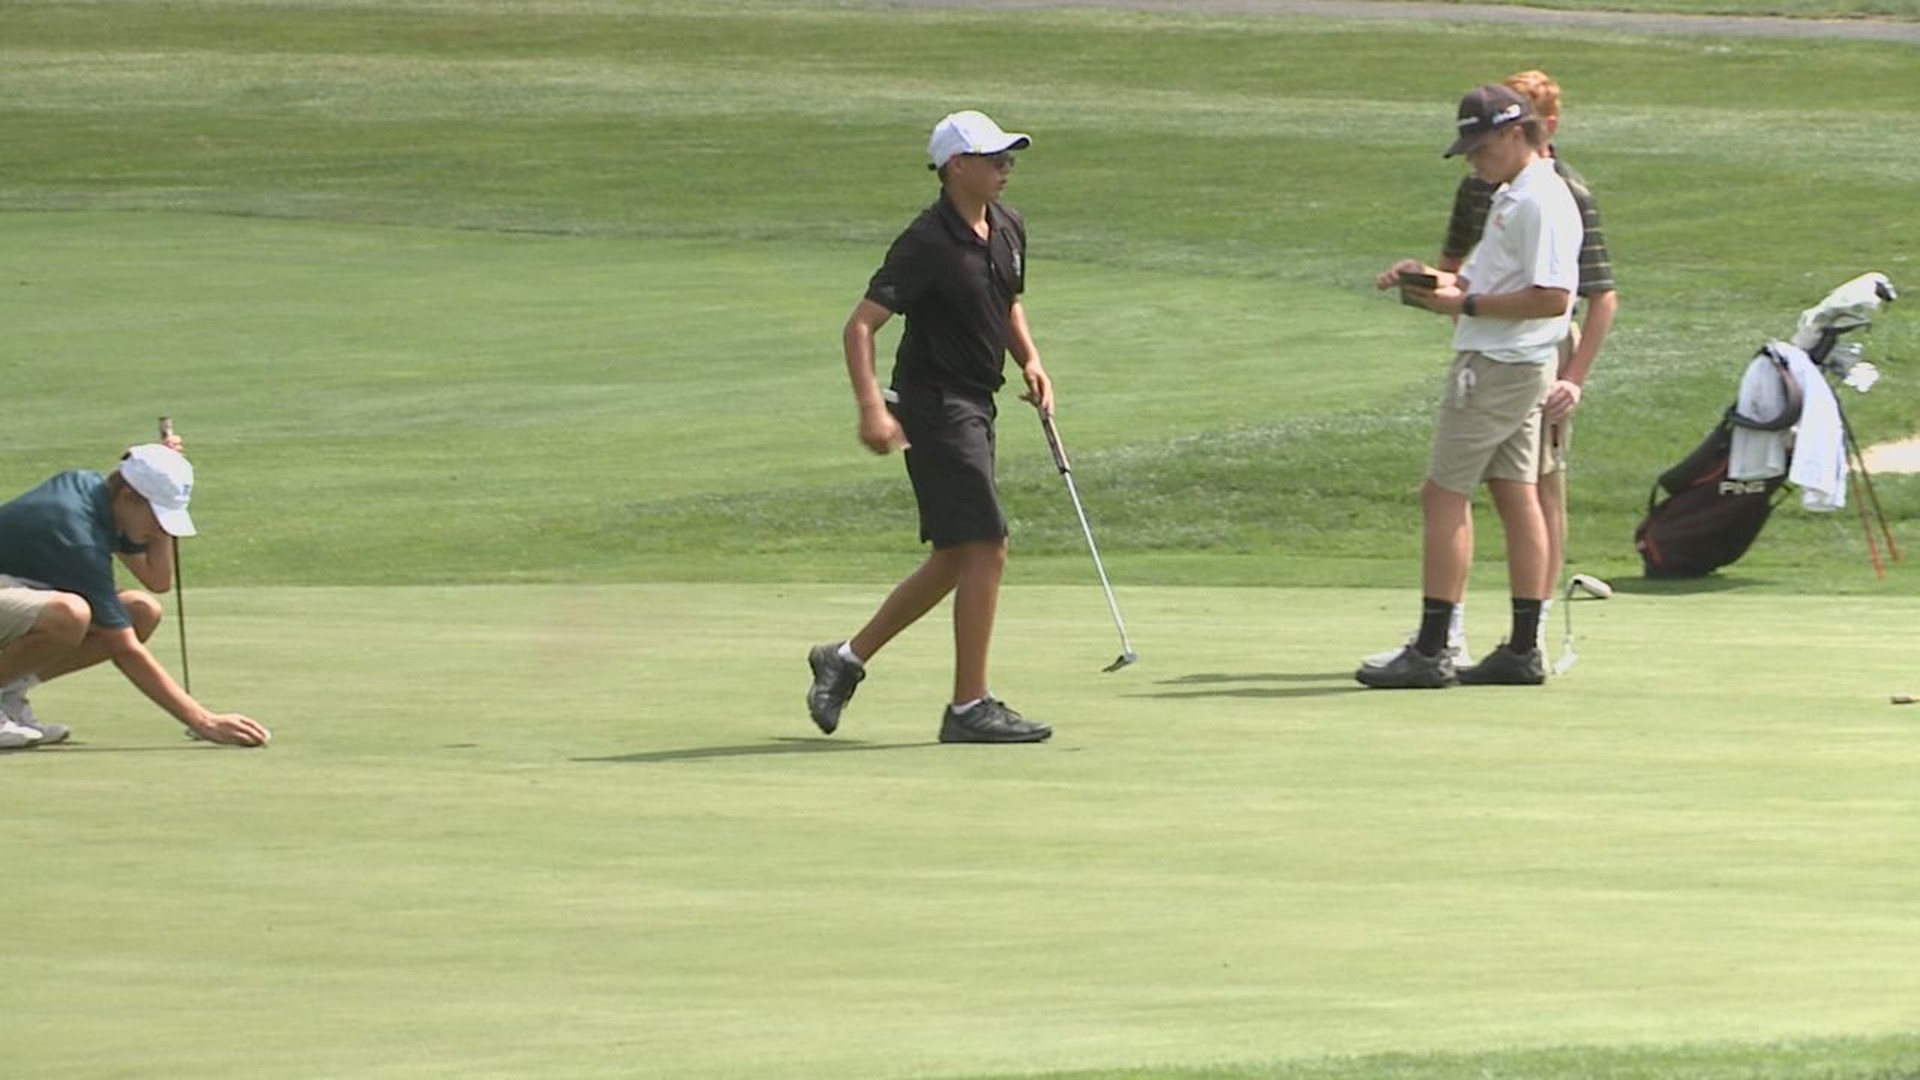 Lake-Lehman Sophomore Shot a 66 to win at Fox Hill Country Club